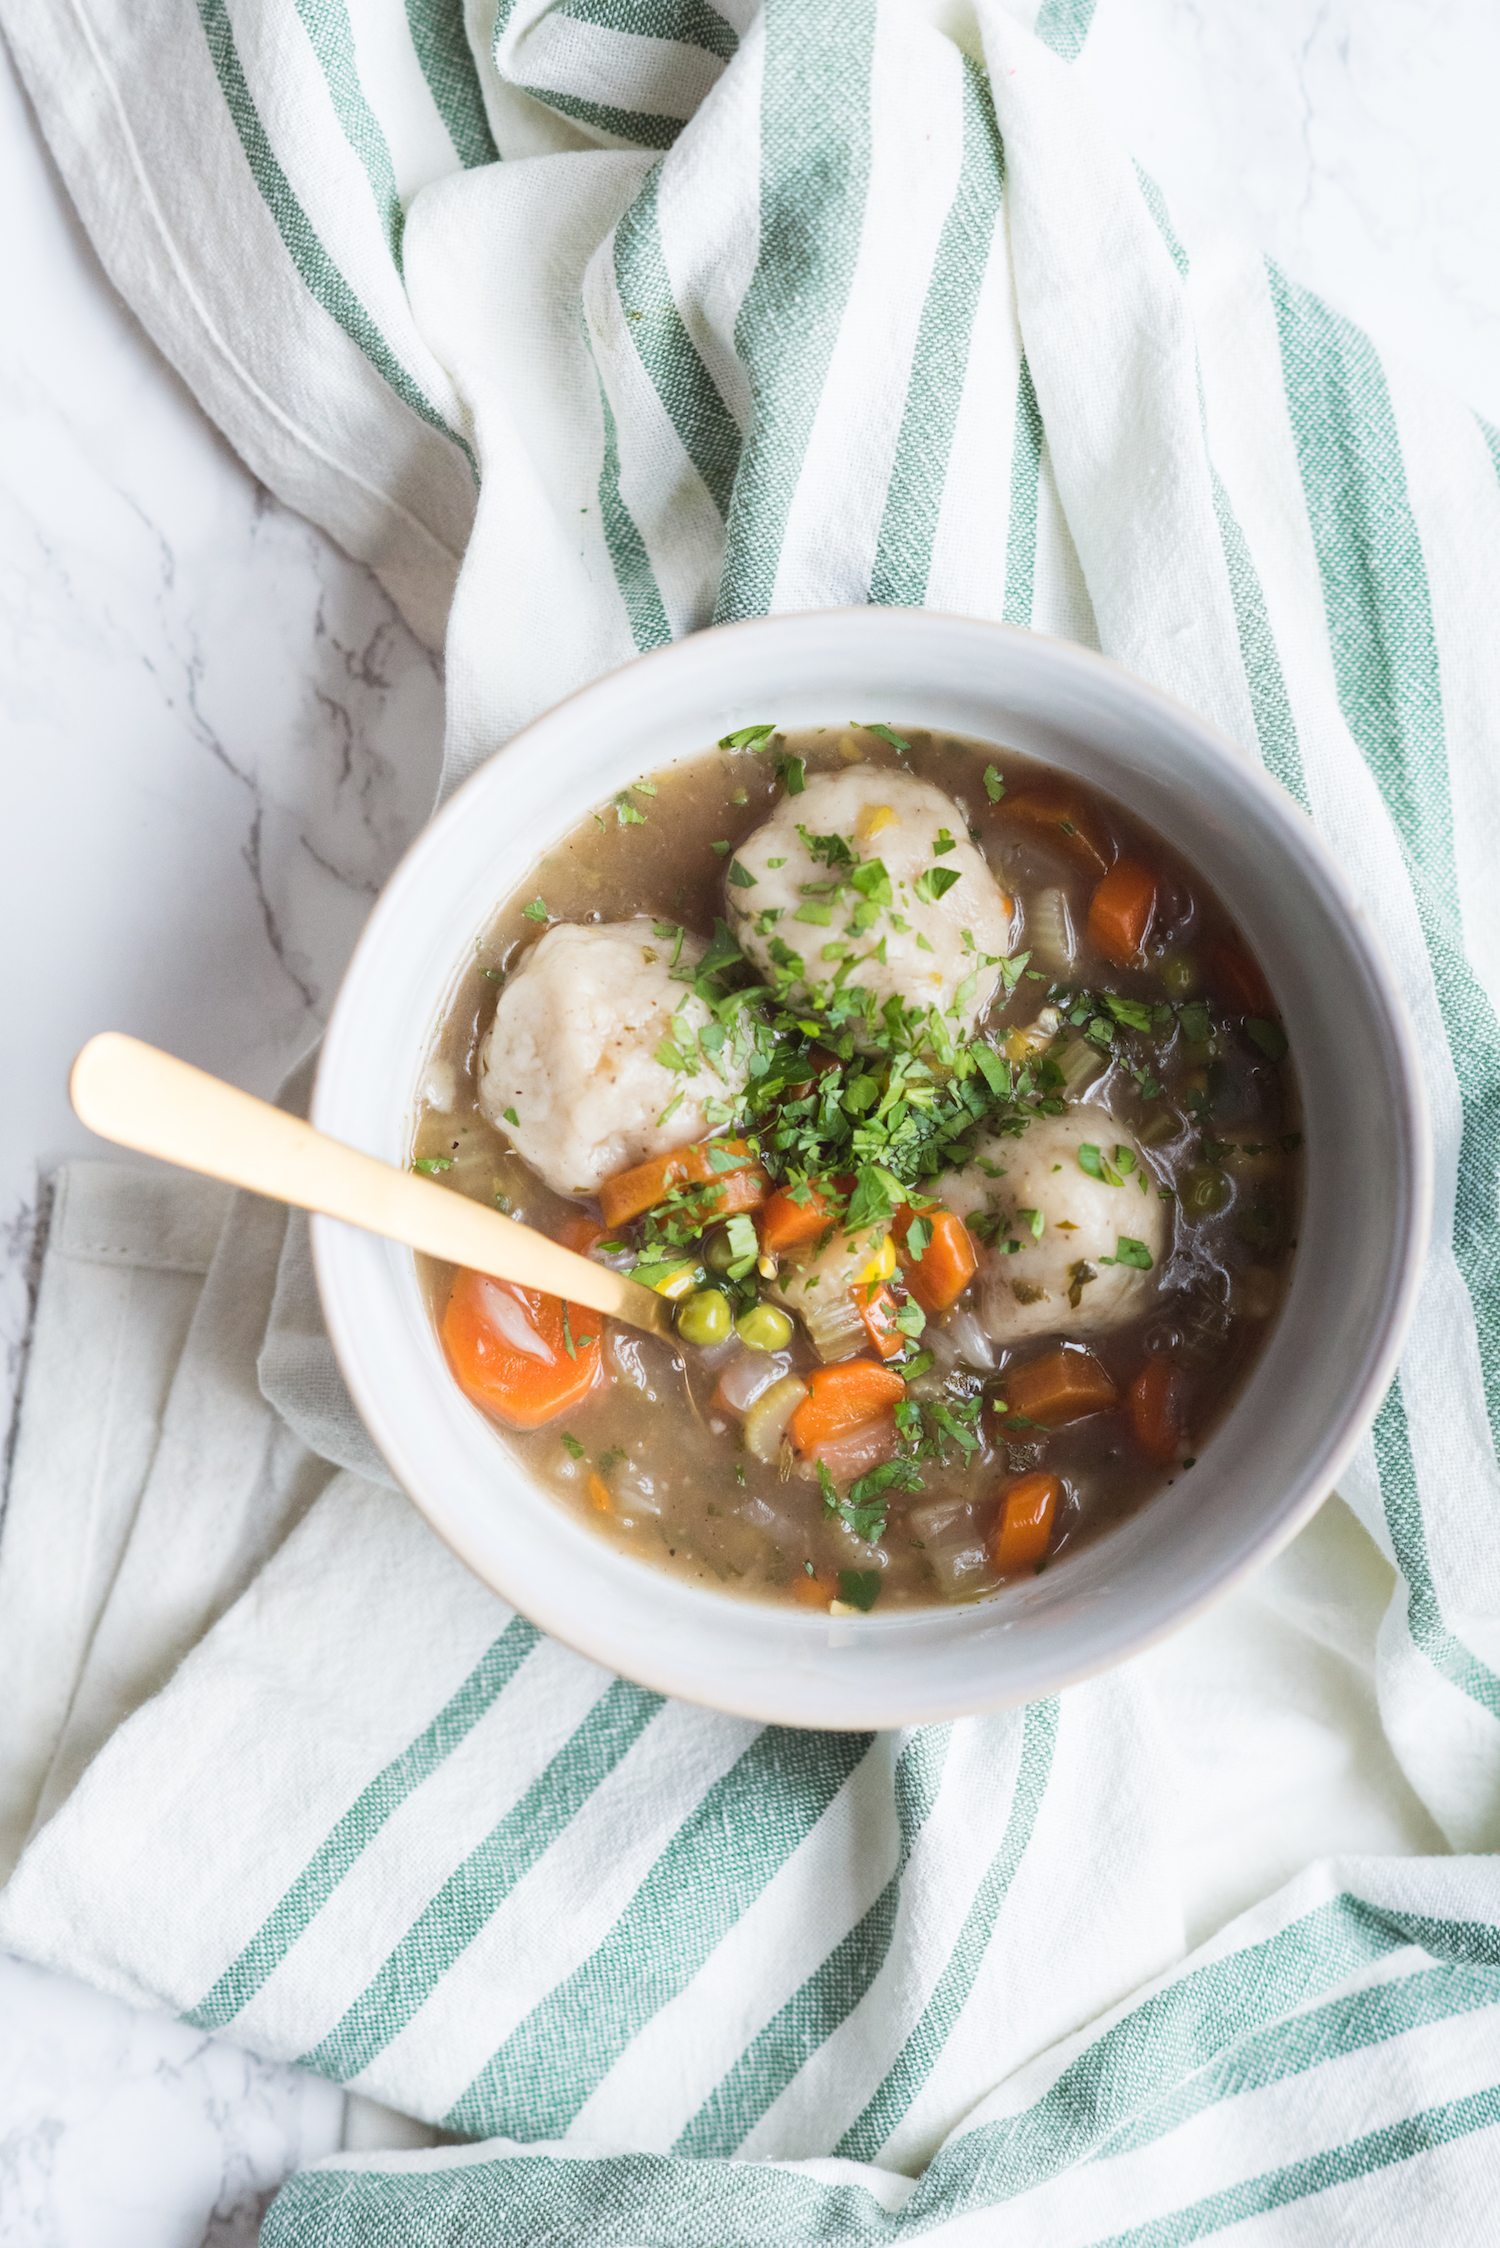 Homemade Veggie Soup with Vegan Dumplings | Entertaining tips, home renovation ideas, vegetarian recipes, party ideas and more from @cydconverse